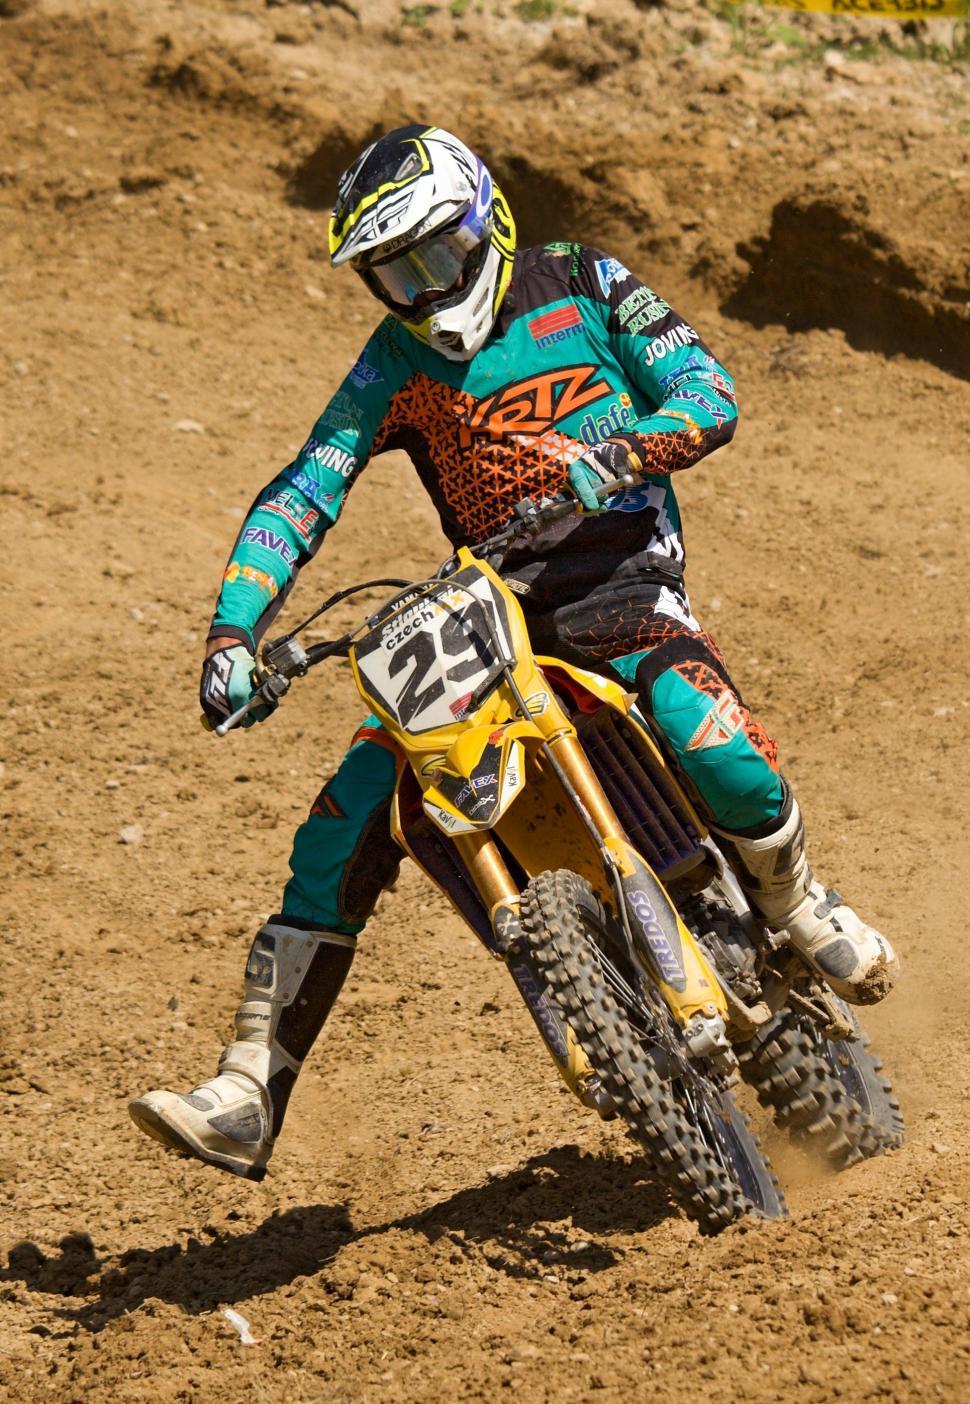 Free Image of Motocross rider in action  